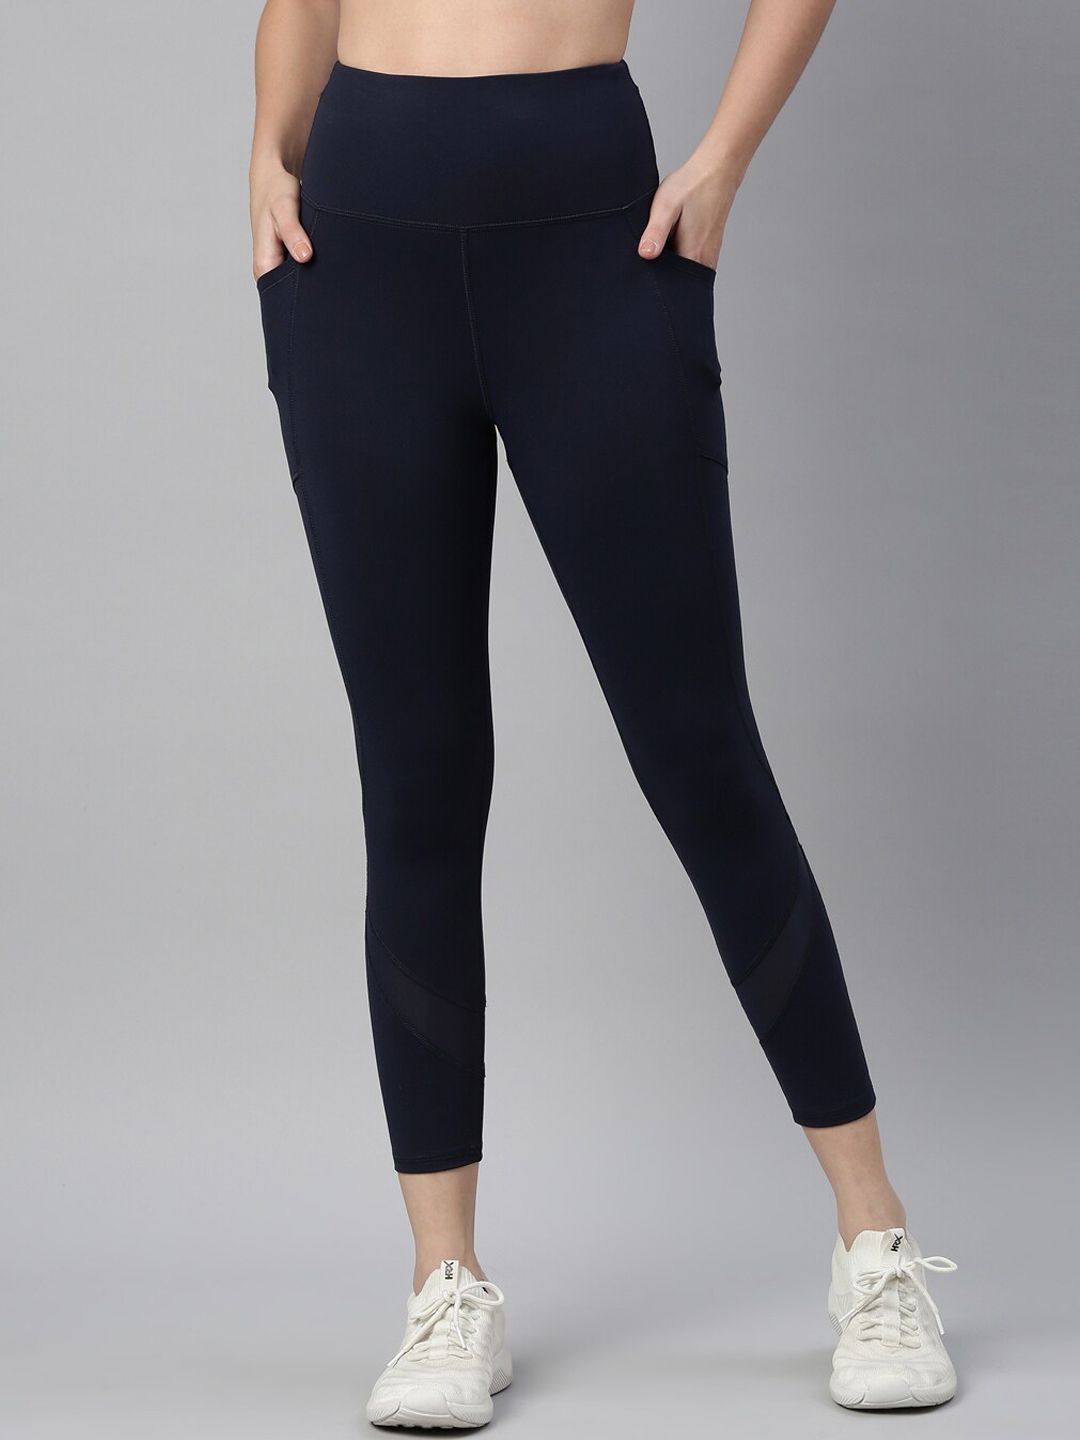 Enamor Women Navy Blue High-Waist Dry Fit Tights Price in India